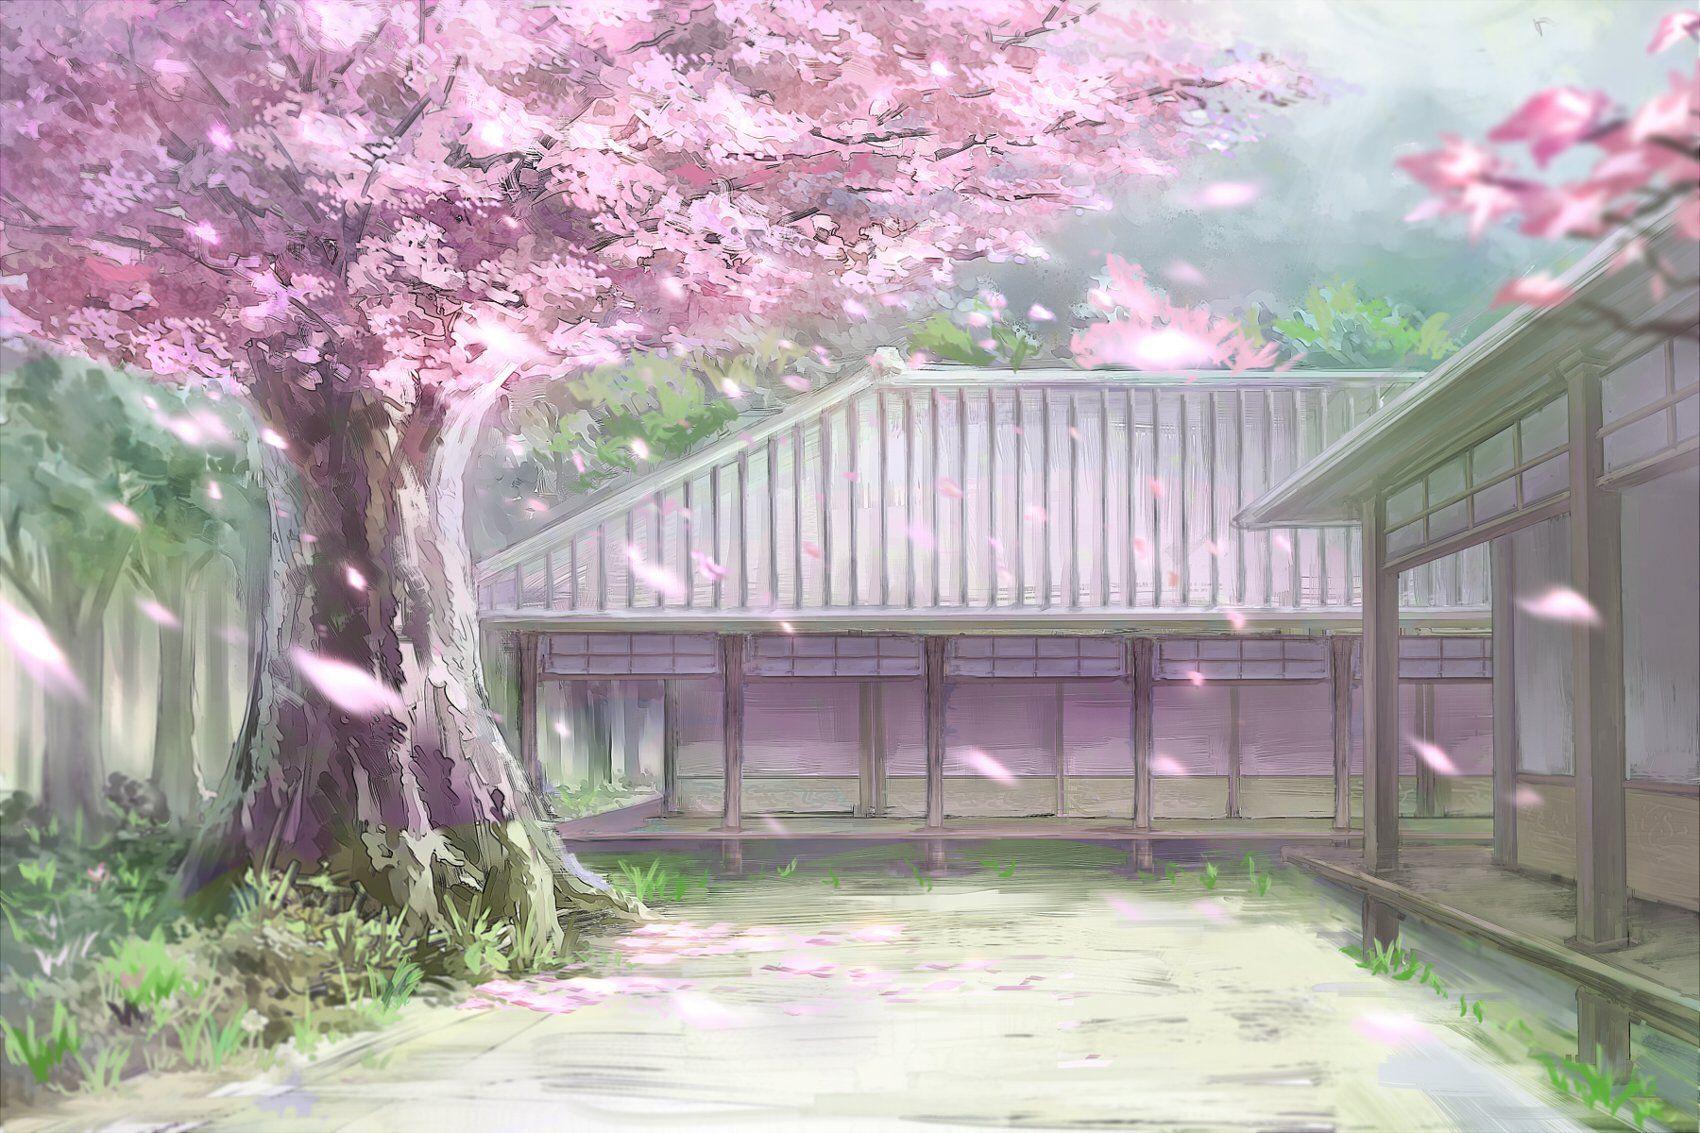 Anime Scenery Cherry Blossoms wallpaper | 1920x1200 | 1018350 | WallpaperUP